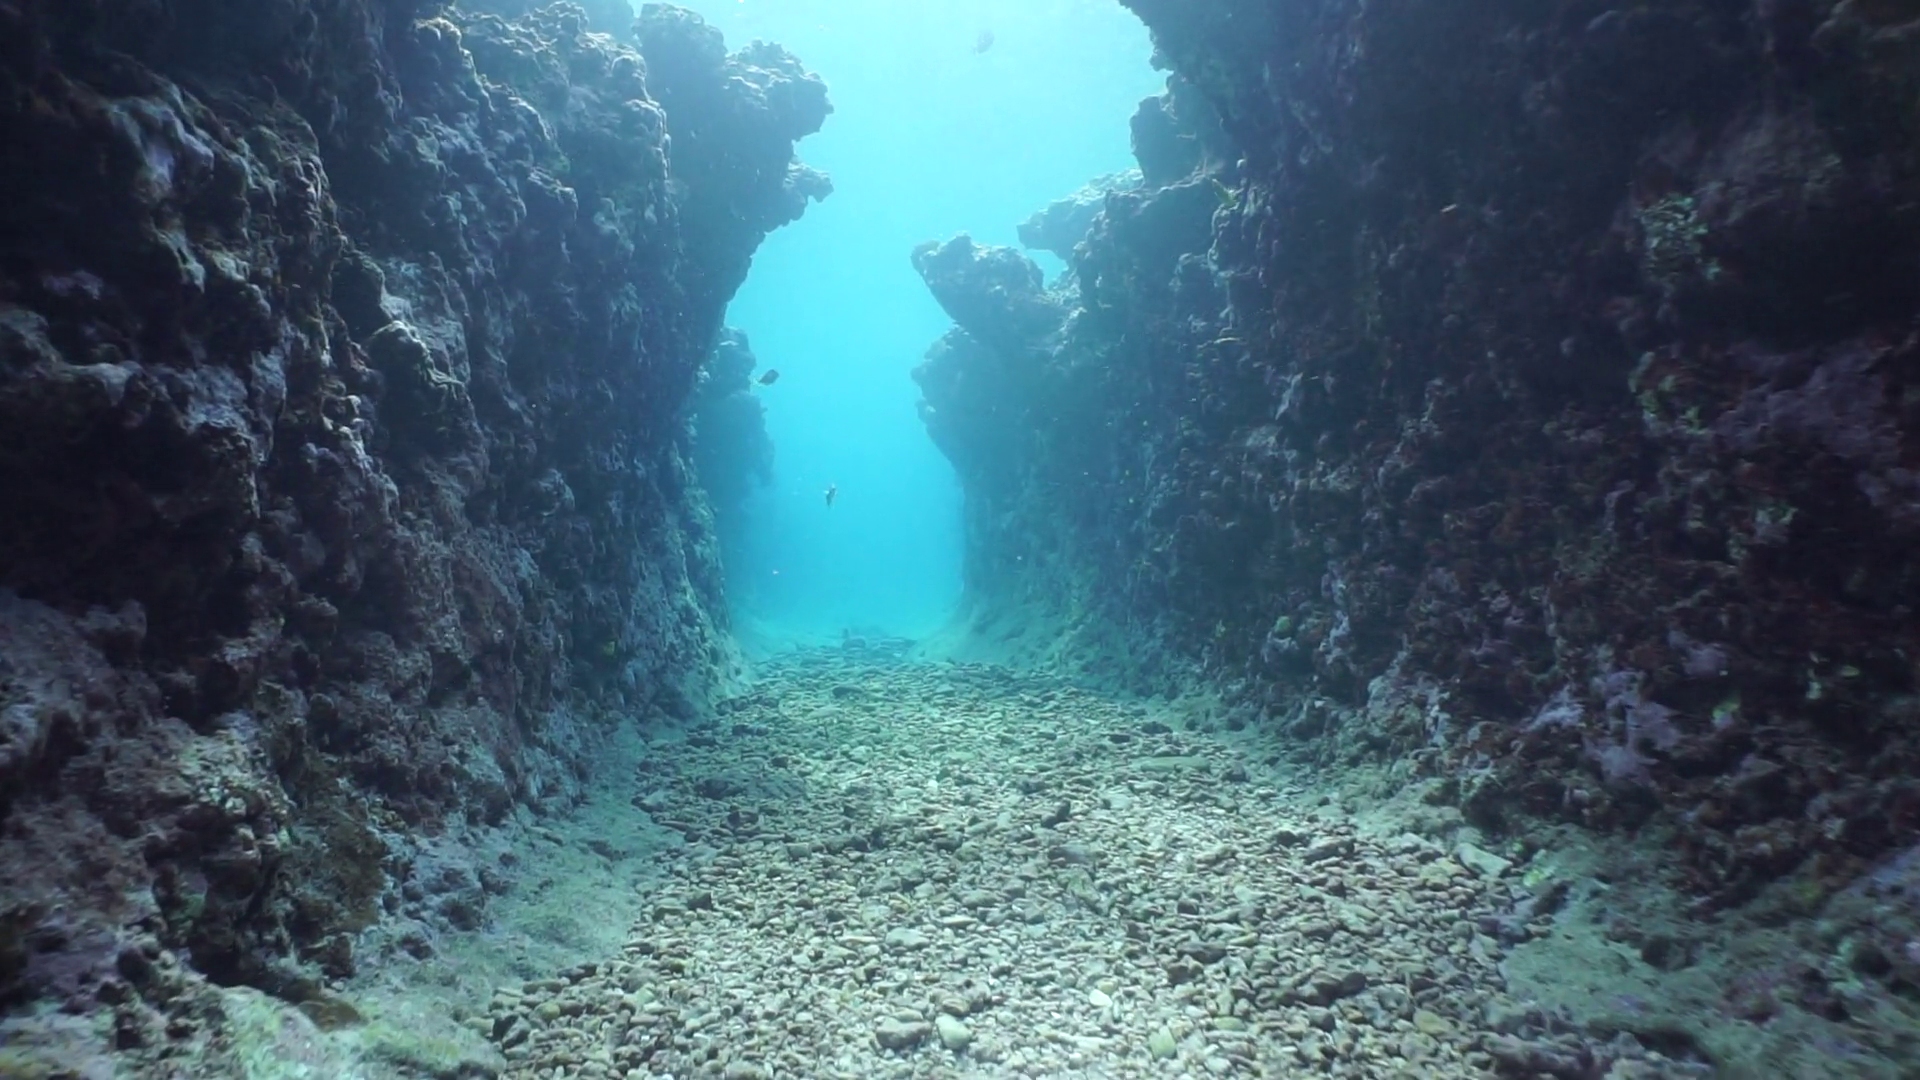 Moving in a natural trench underwater carved into the seafloor on ...